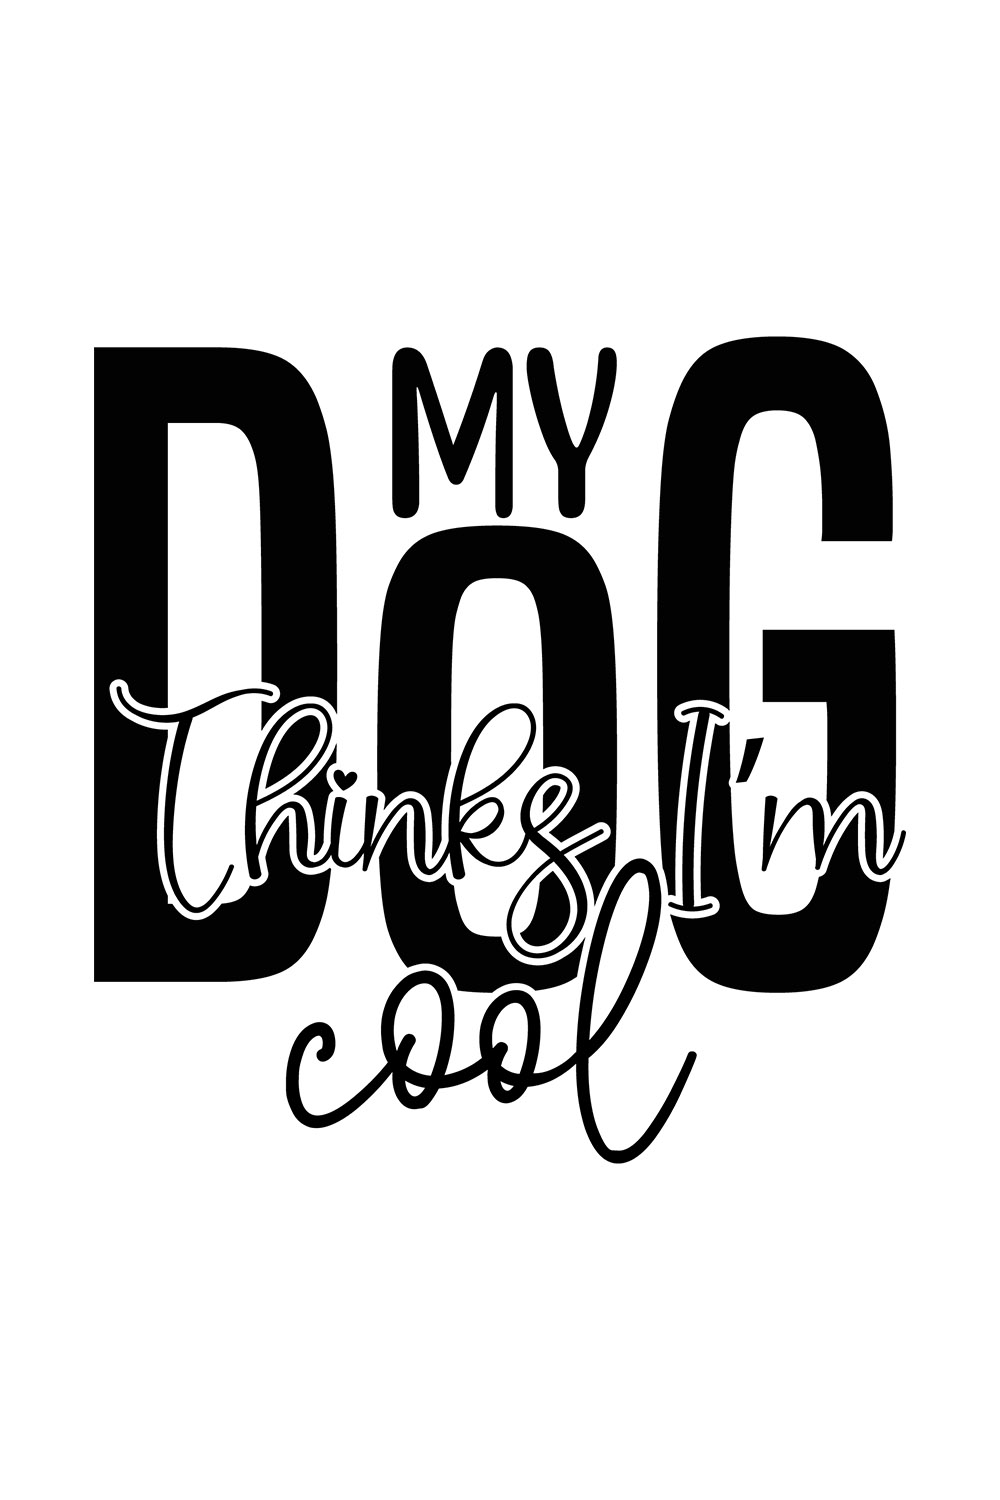 Image with gorgeous black lettering for My Dog Thinks Im Cool prints.